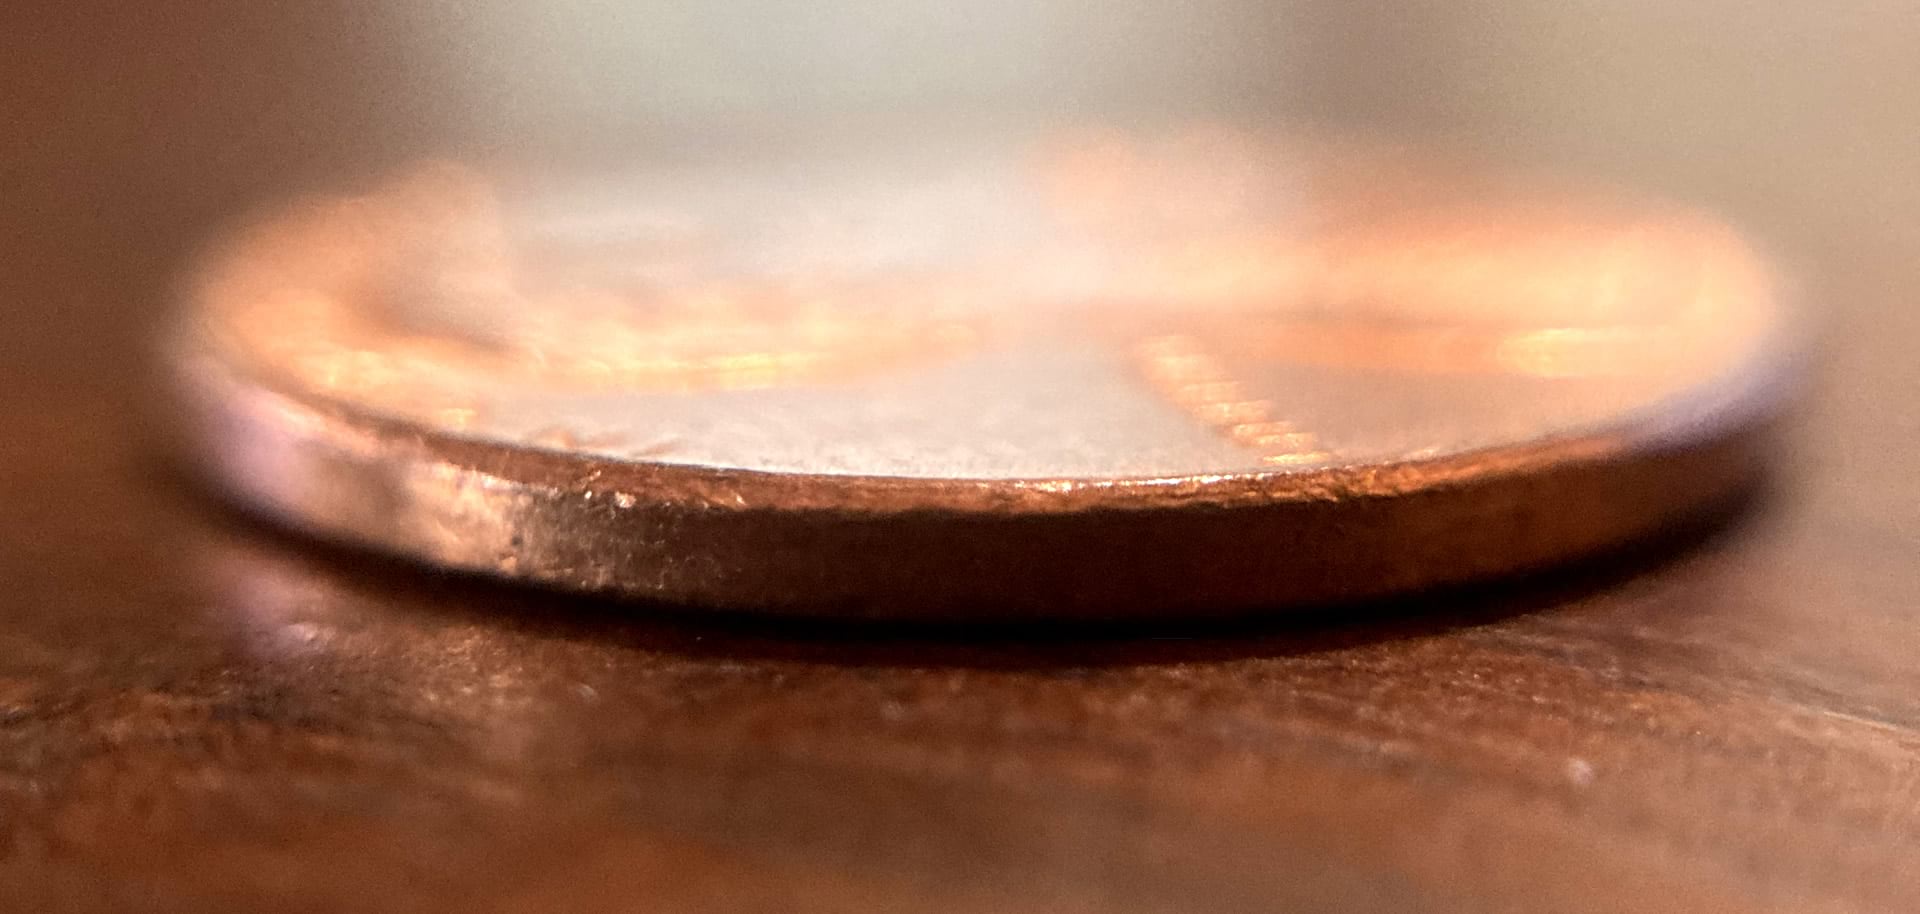 At this scale, humans can't breathe beyond the thickness of a penny.